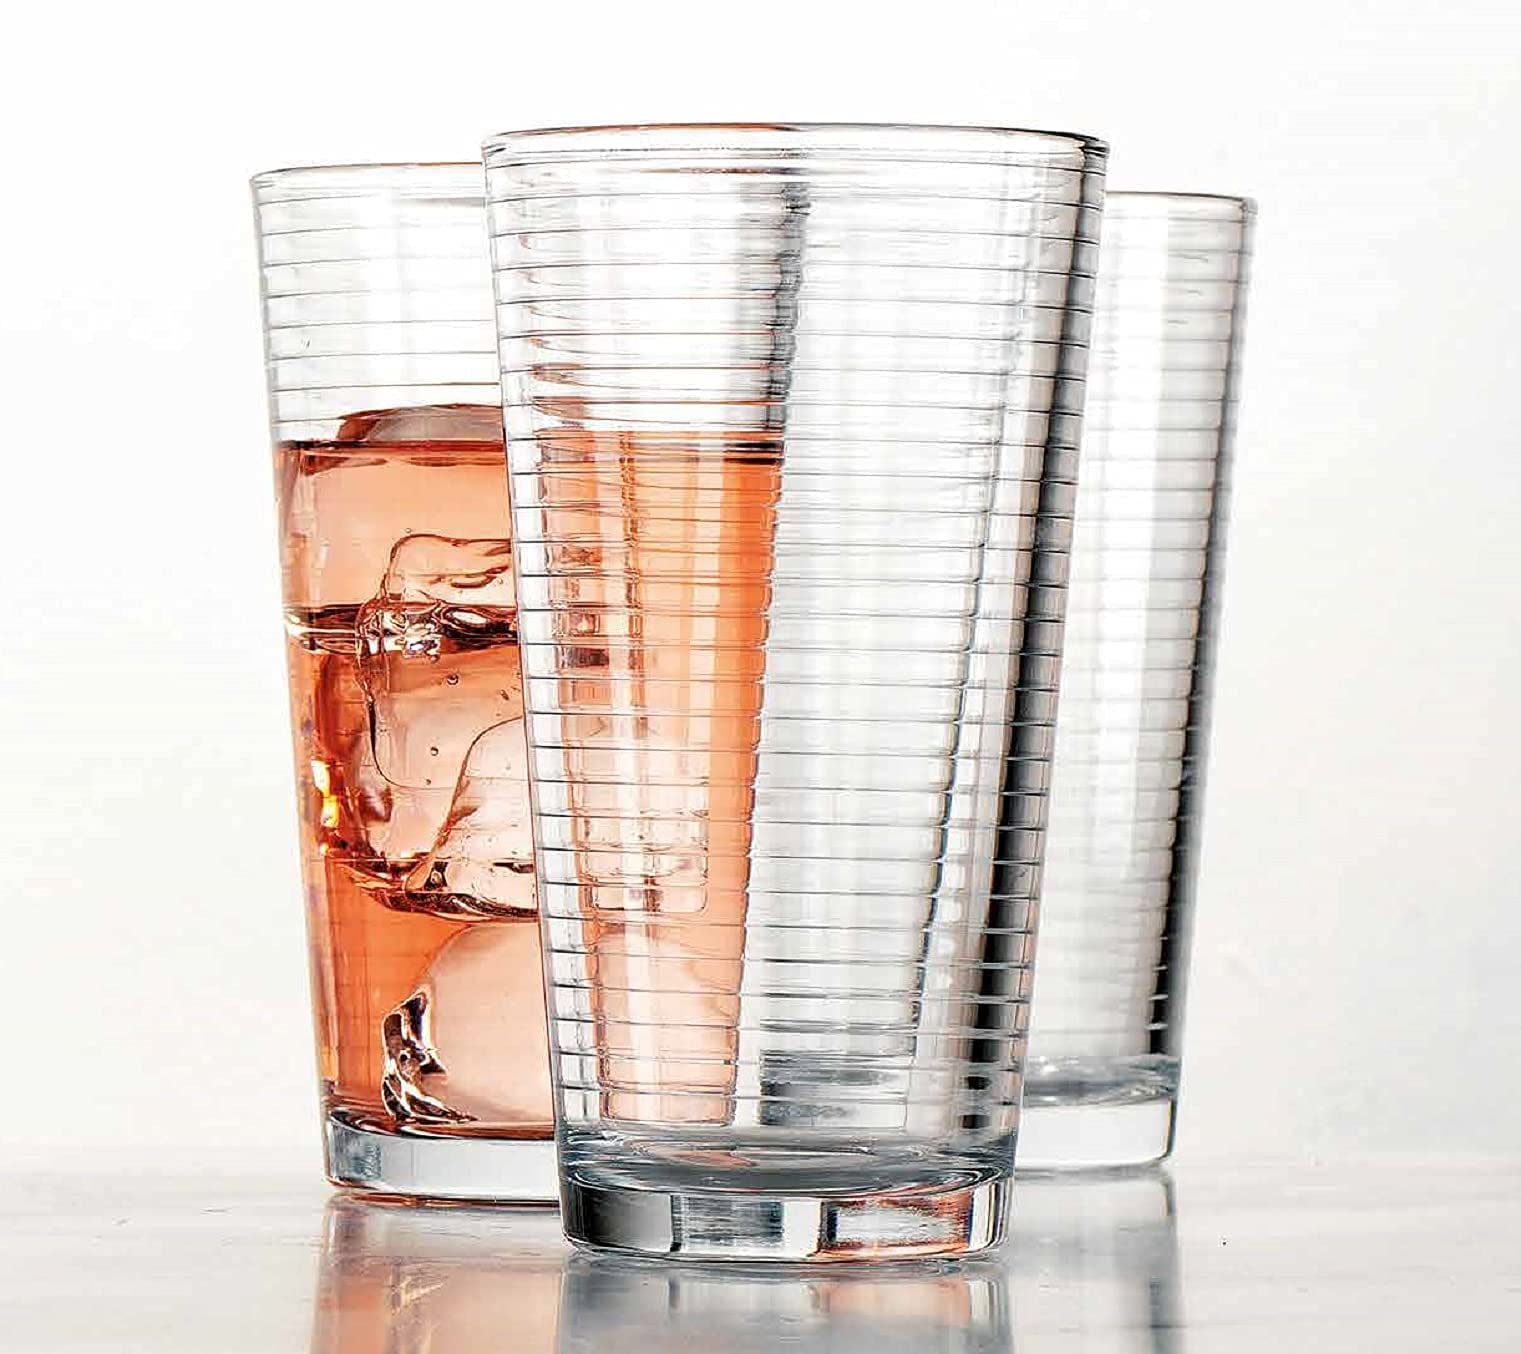 Drinking Glasses Set of Highball Glass Cups By Glavers, Premium Quality Cooler 17 Oz. Ribbed Glassware. Ideal for Water, Juice, Cocktails, and Iced Tea. Dishwasher Safe.…  - Good